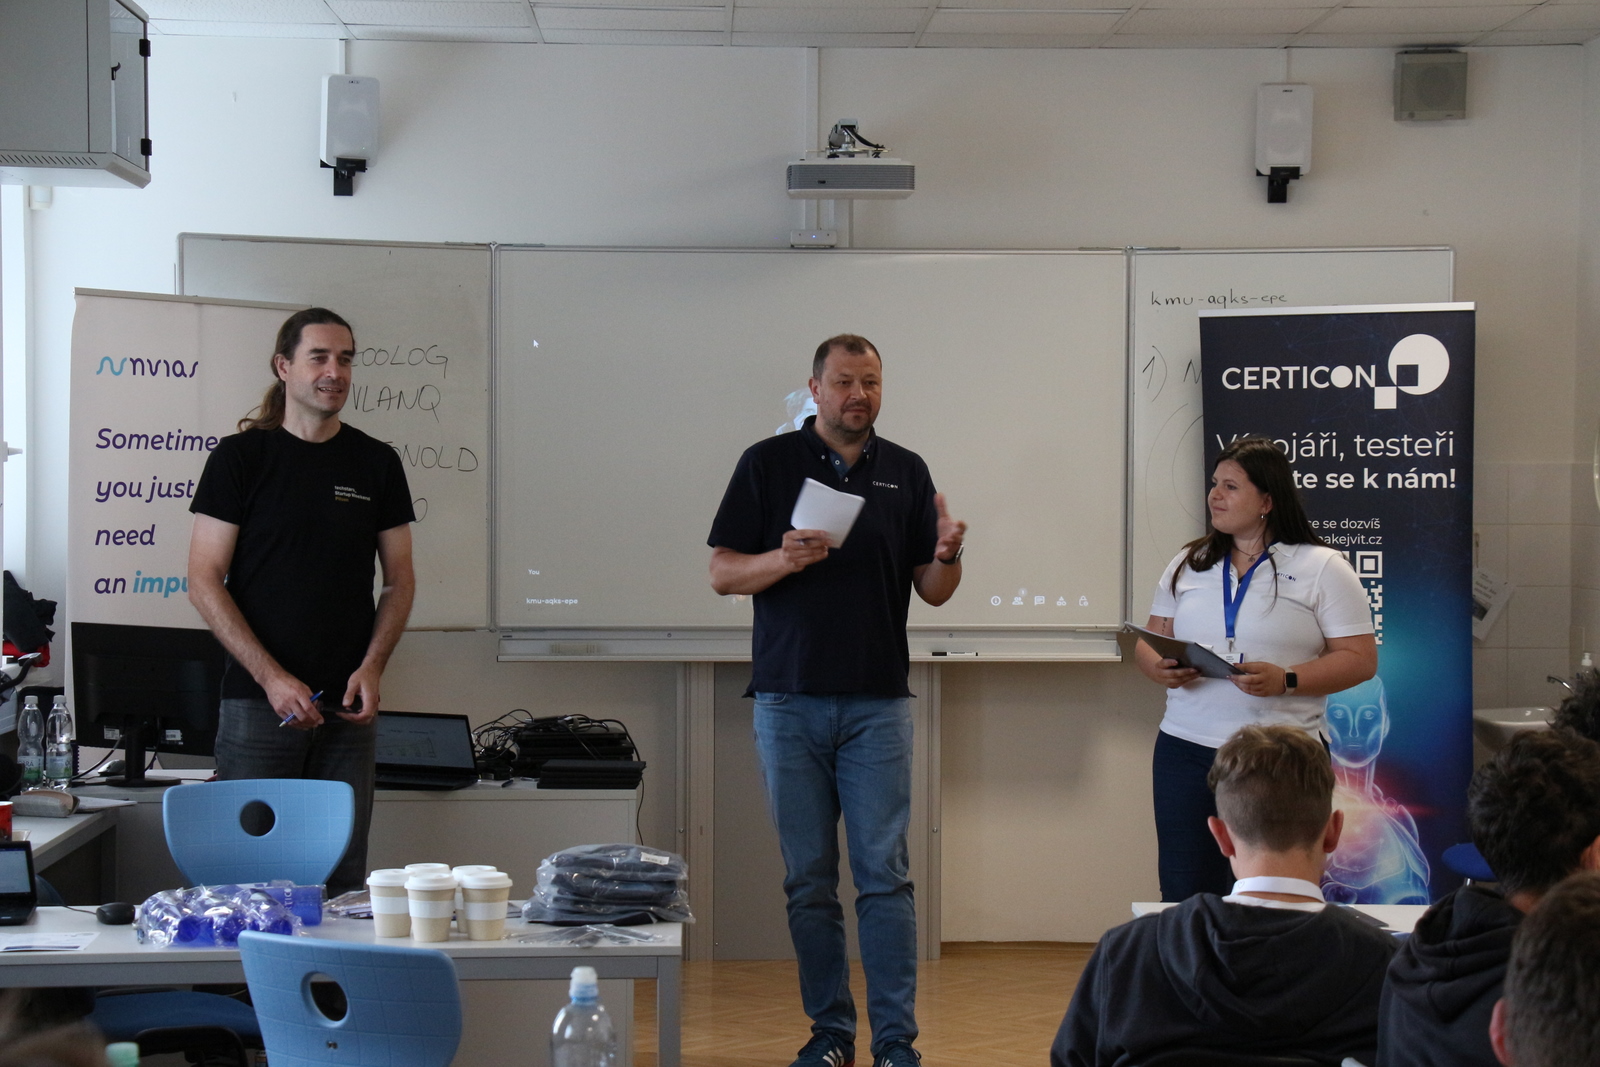 Project day with INFIS school – Cooperation with Certicon